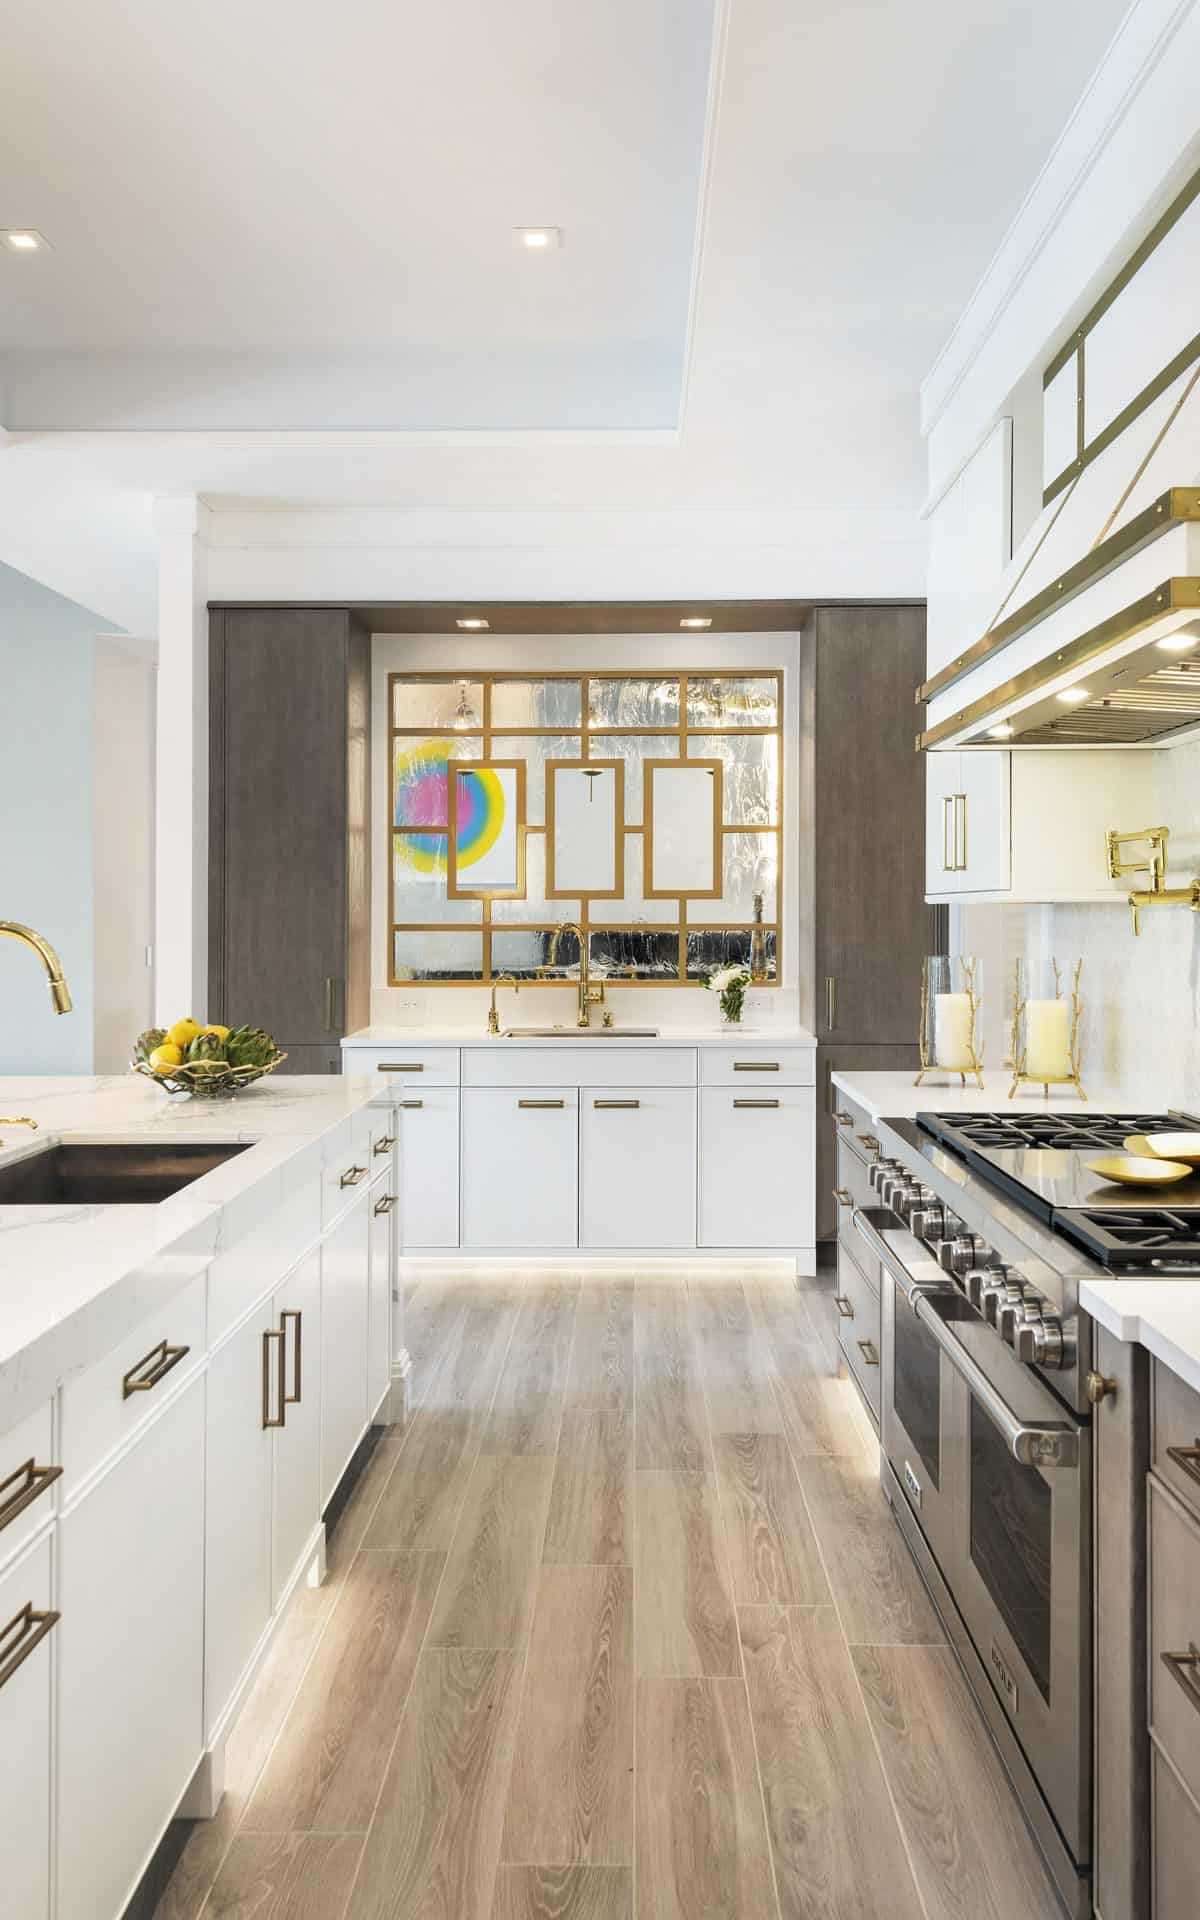 Classic kitchen features white custom cabinetry and dramatic mirrored bar with gold contemporary design.